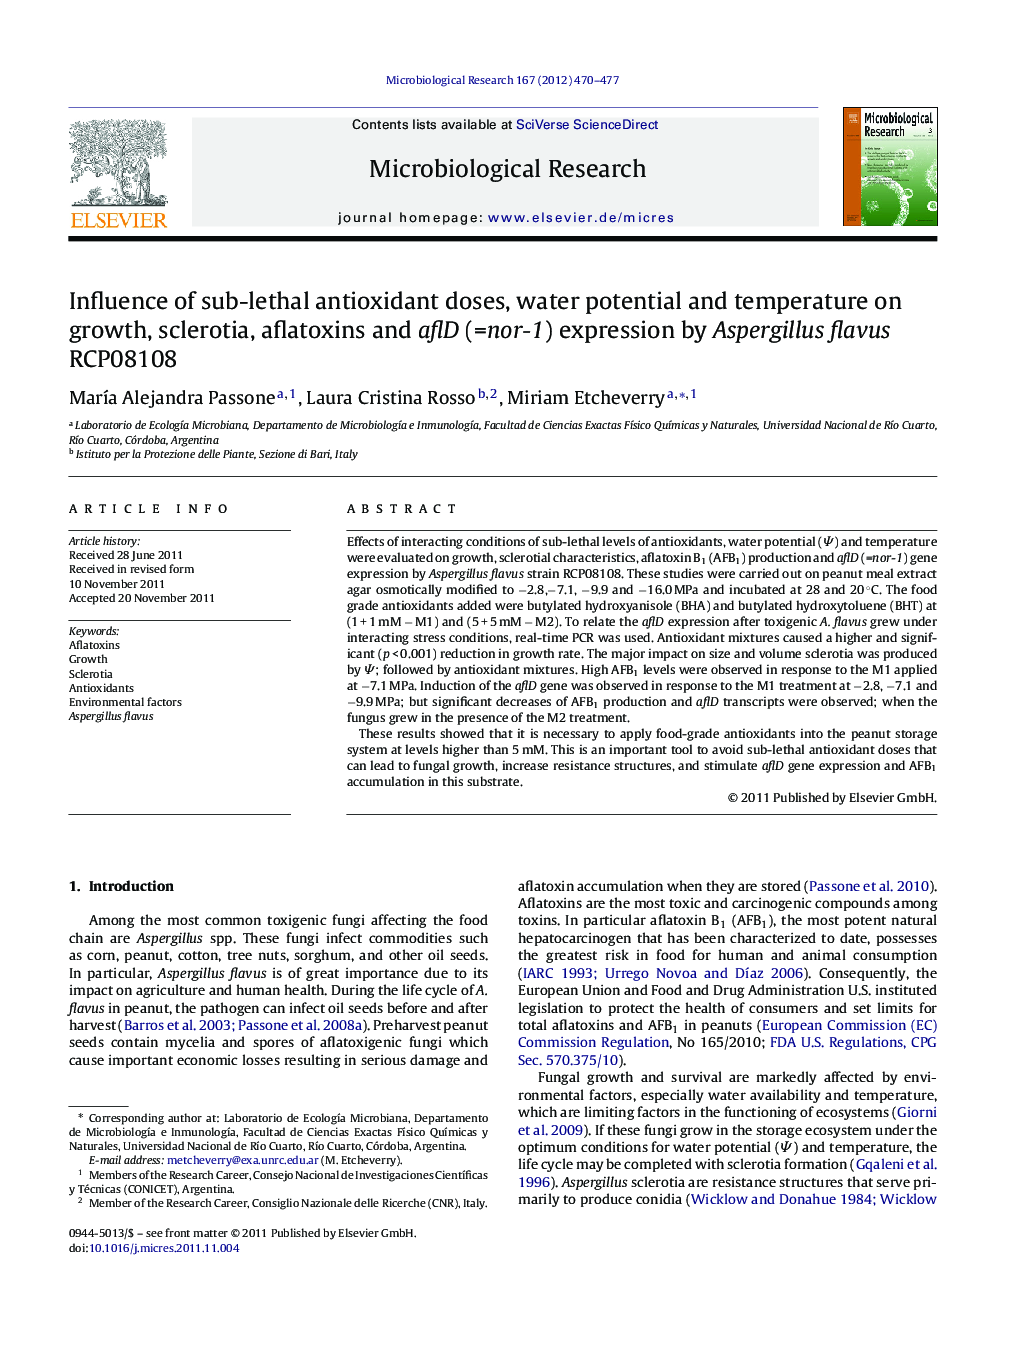 Influence of sub-lethal antioxidant doses, water potential and temperature on growth, sclerotia, aflatoxins and aflD (=nor-1) expression by Aspergillus flavus RCP08108